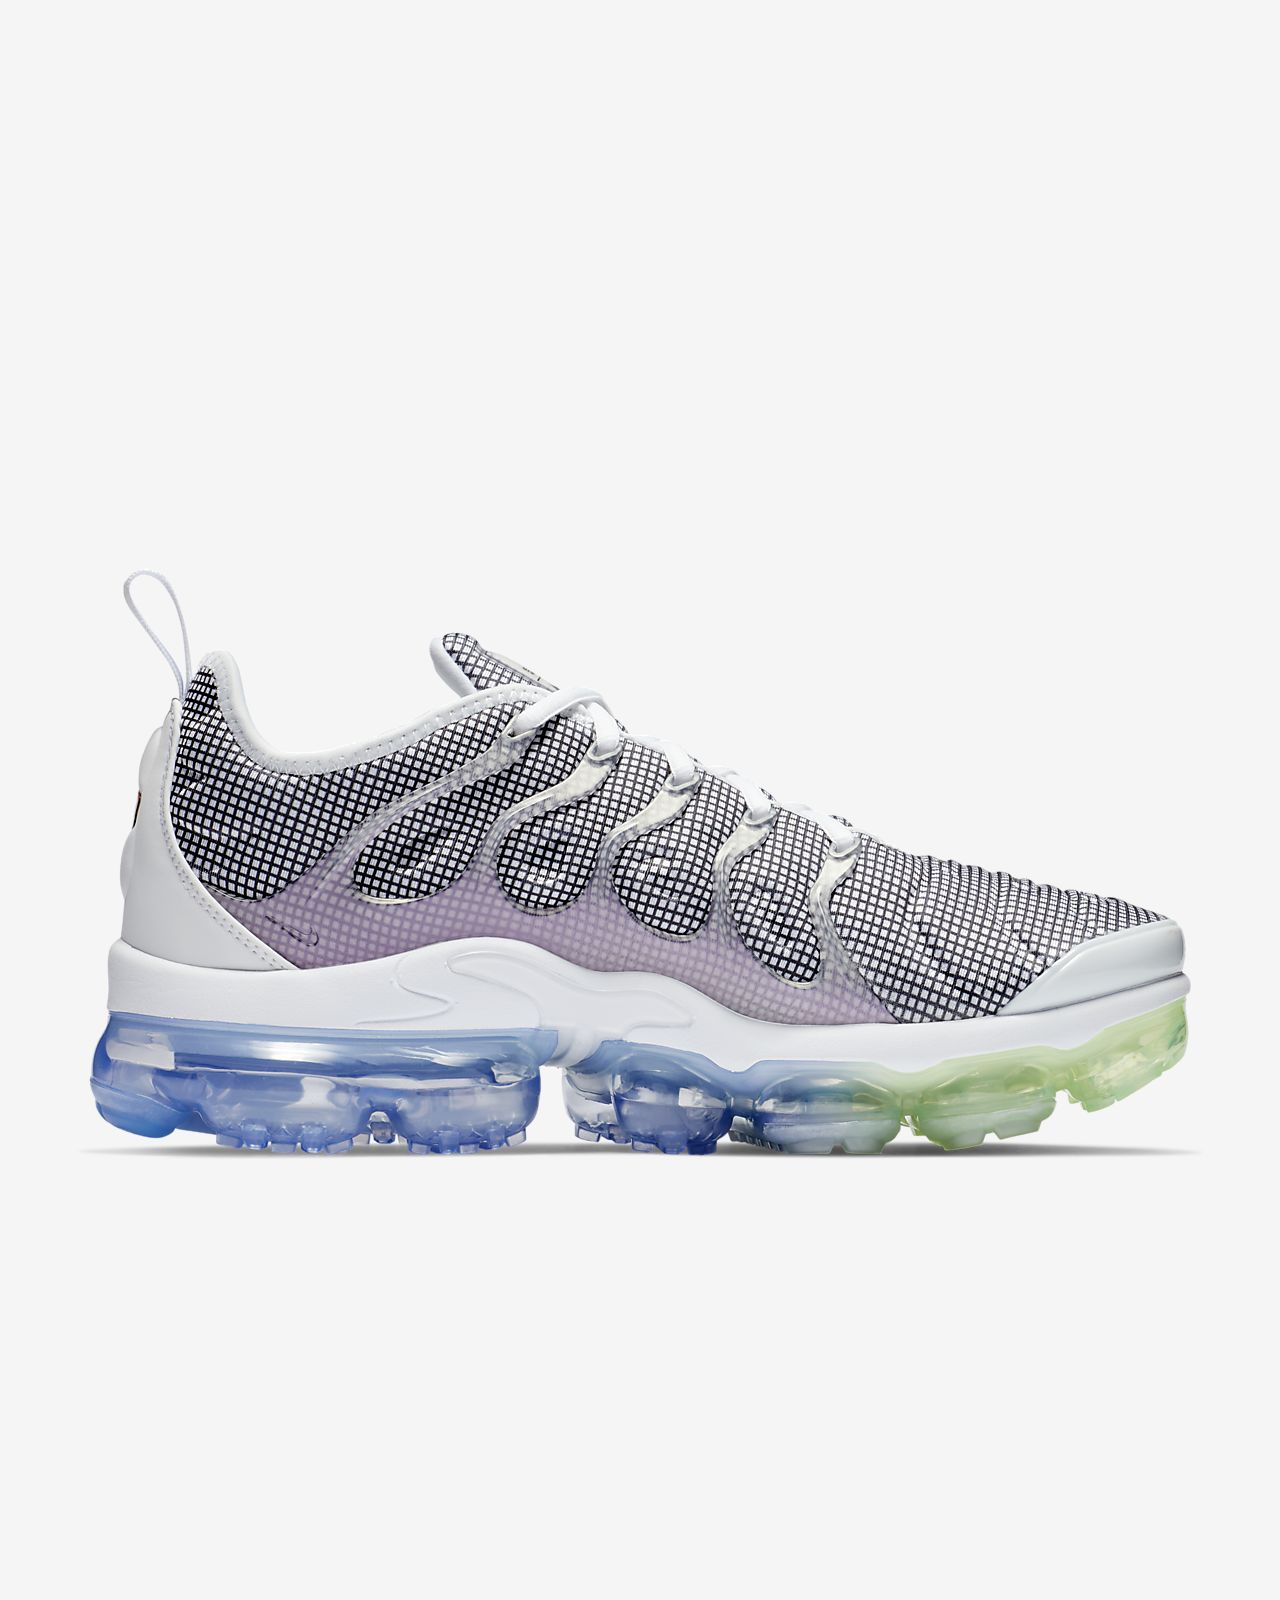 Nike Vapor Max Plus Nike Shoes with Best